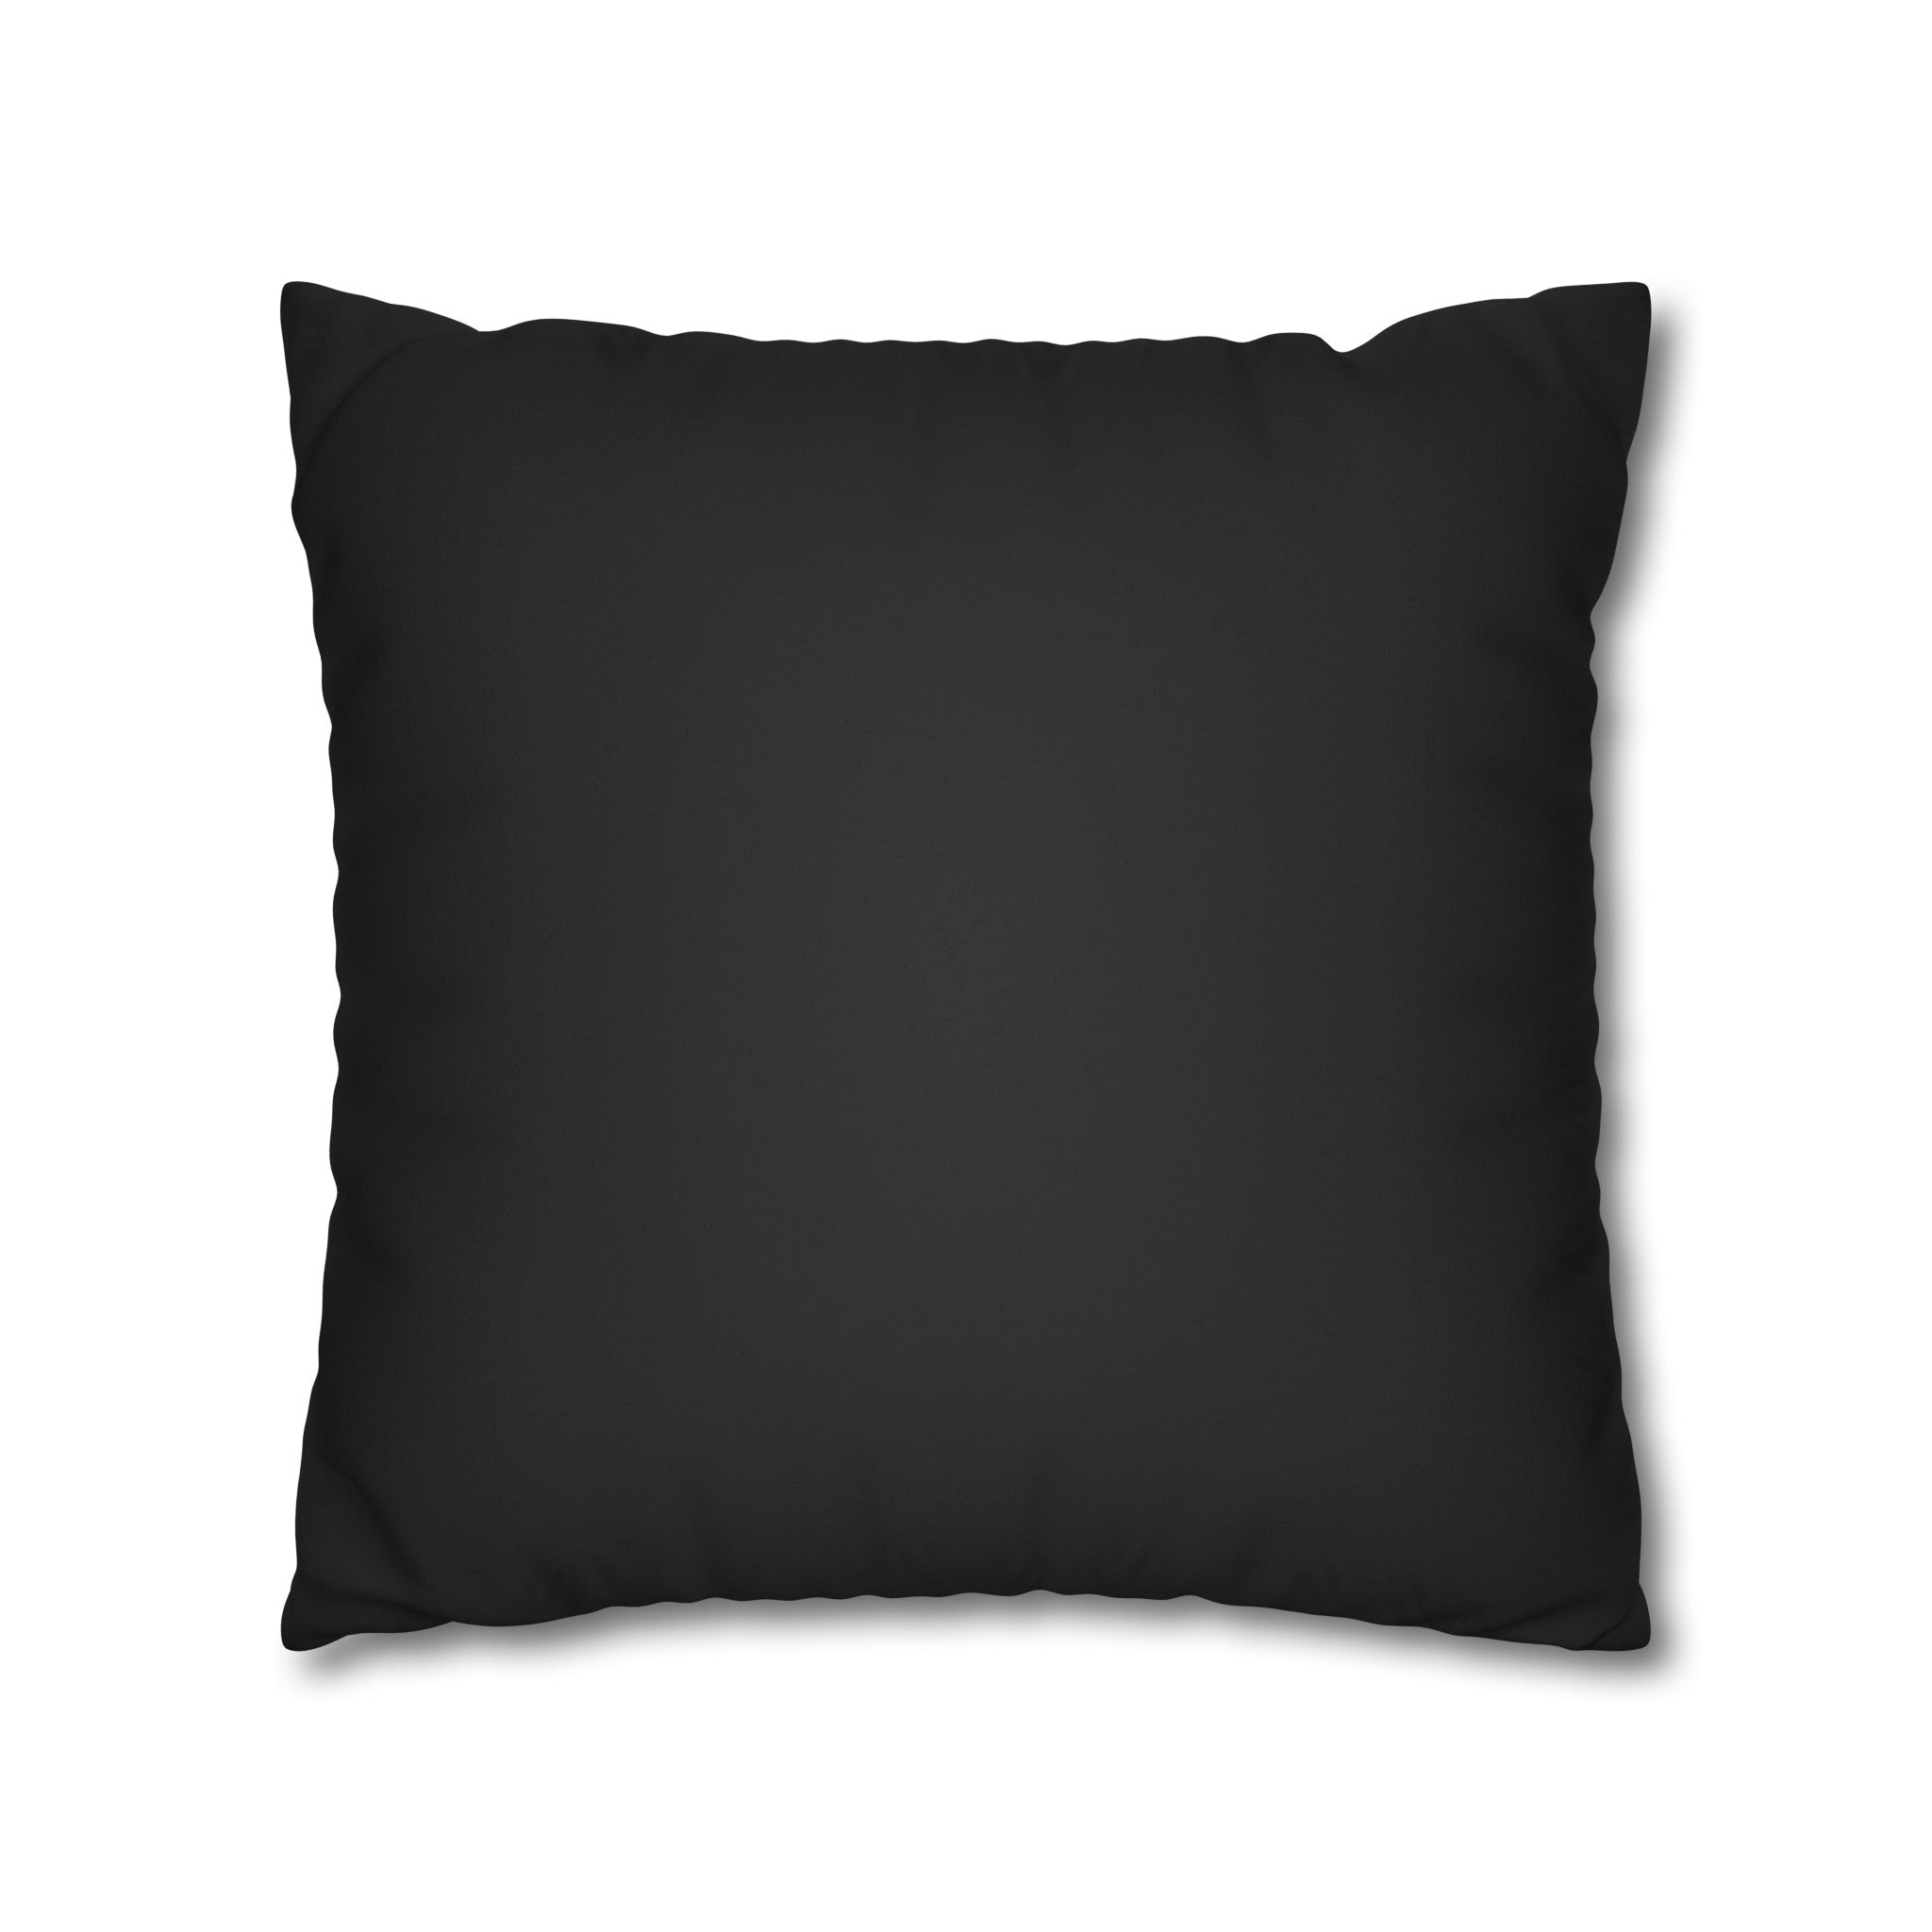 Daytime Serenade Faux Suede Throw Pillow: Whimsical Romance